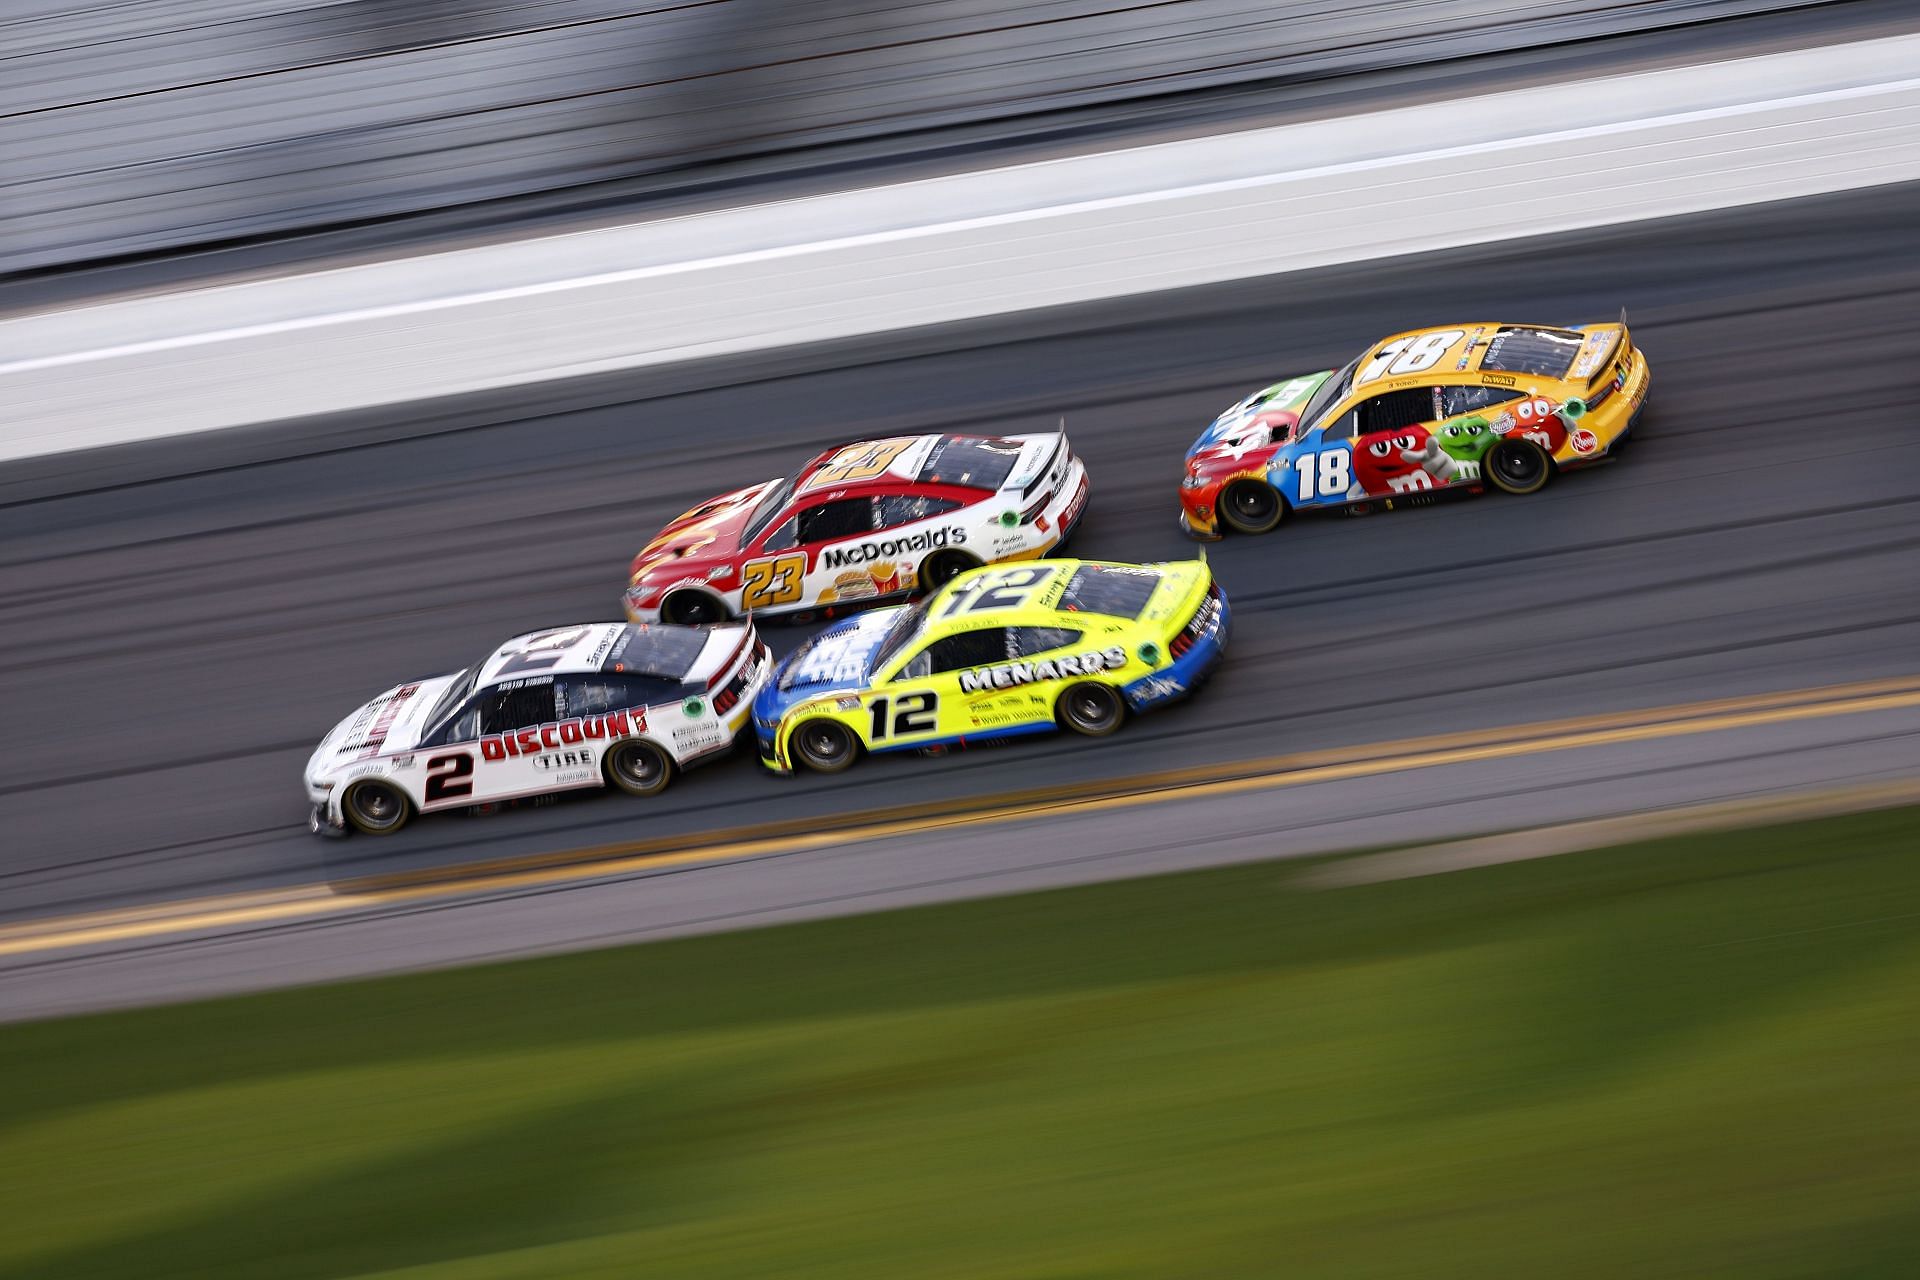 The Next Gen cars running at the 64th Annual Daytona 500